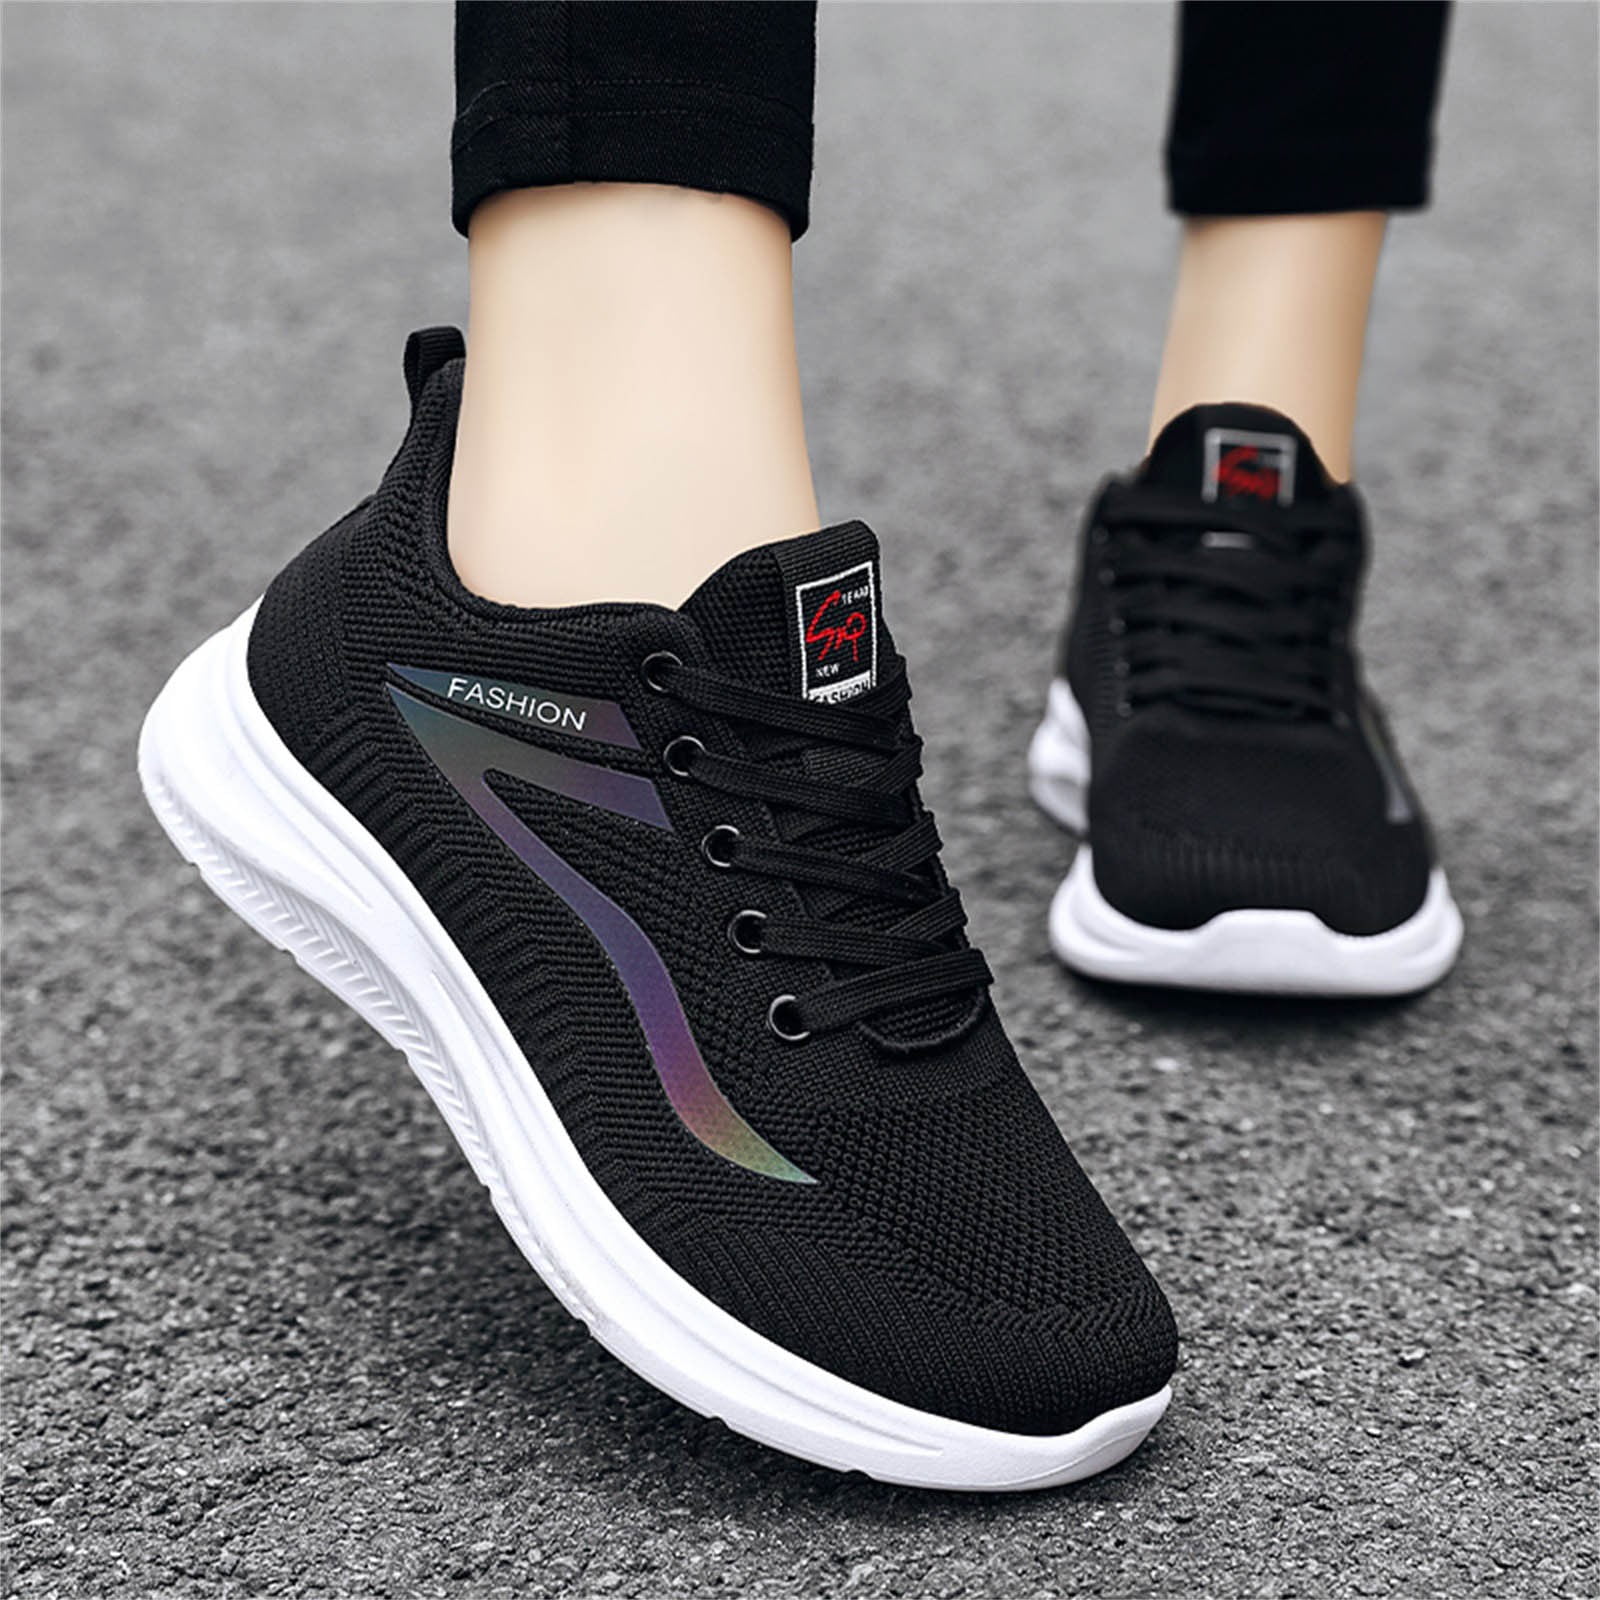 Ritual champignon hver for sig Fashion Autumn Women's Sneakers Flat Lightweight Round Toe Lace Up Mesh  Breathable Simple Style Winter Hiking Sneakers Women Animal Print Sneakers  for Women Lace up Rhinestone Sneakers for Women Flat - Walmart.com